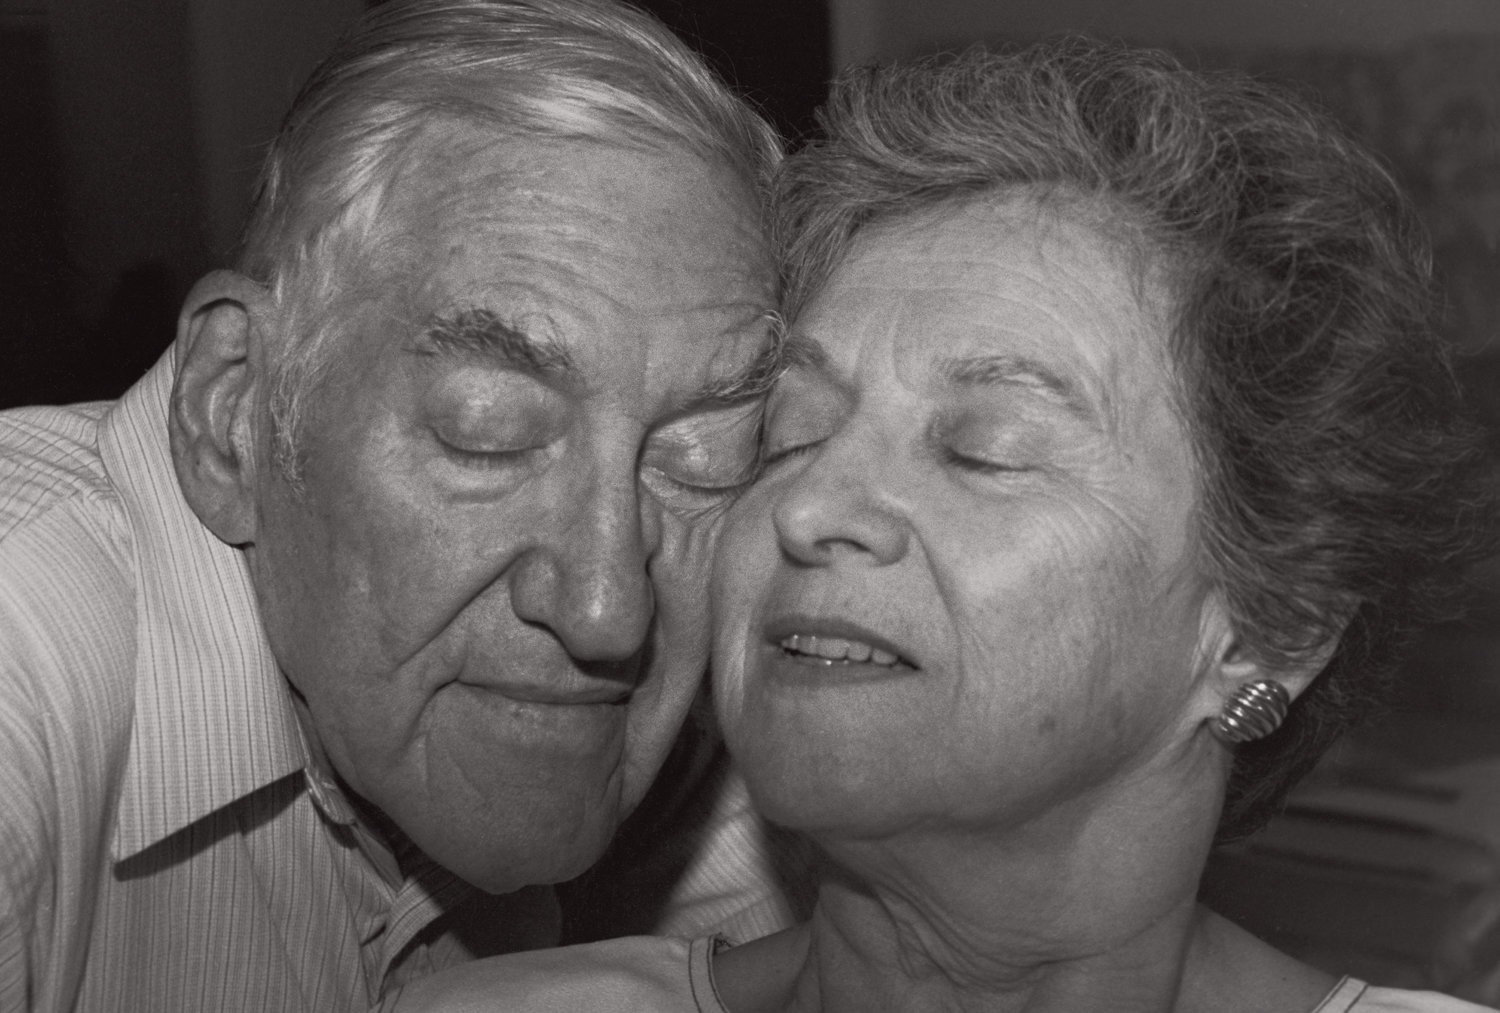 Robert Fass photographed Irwin and Evelyn for ‘As Long As We Both Shall Live,’ a portrait series of American couples who have been married 40 years. It’s part of a display at The Riverdale Y’s Gallery 18, originally scheduled to run through April, but currently closed because of the coronavirus crisis.